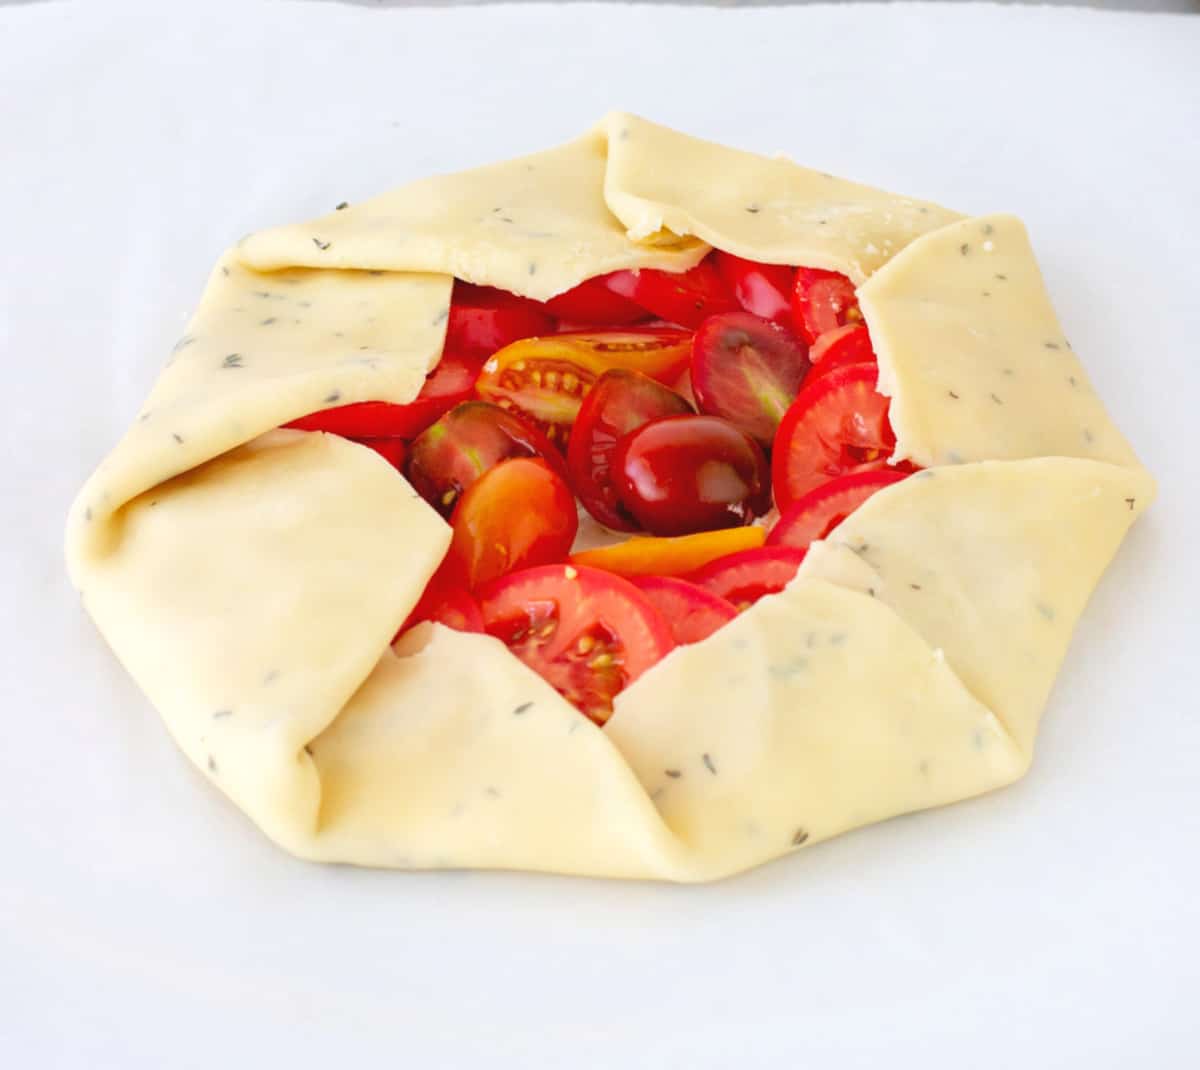 Unbaked tomato galette on white parchment paper.